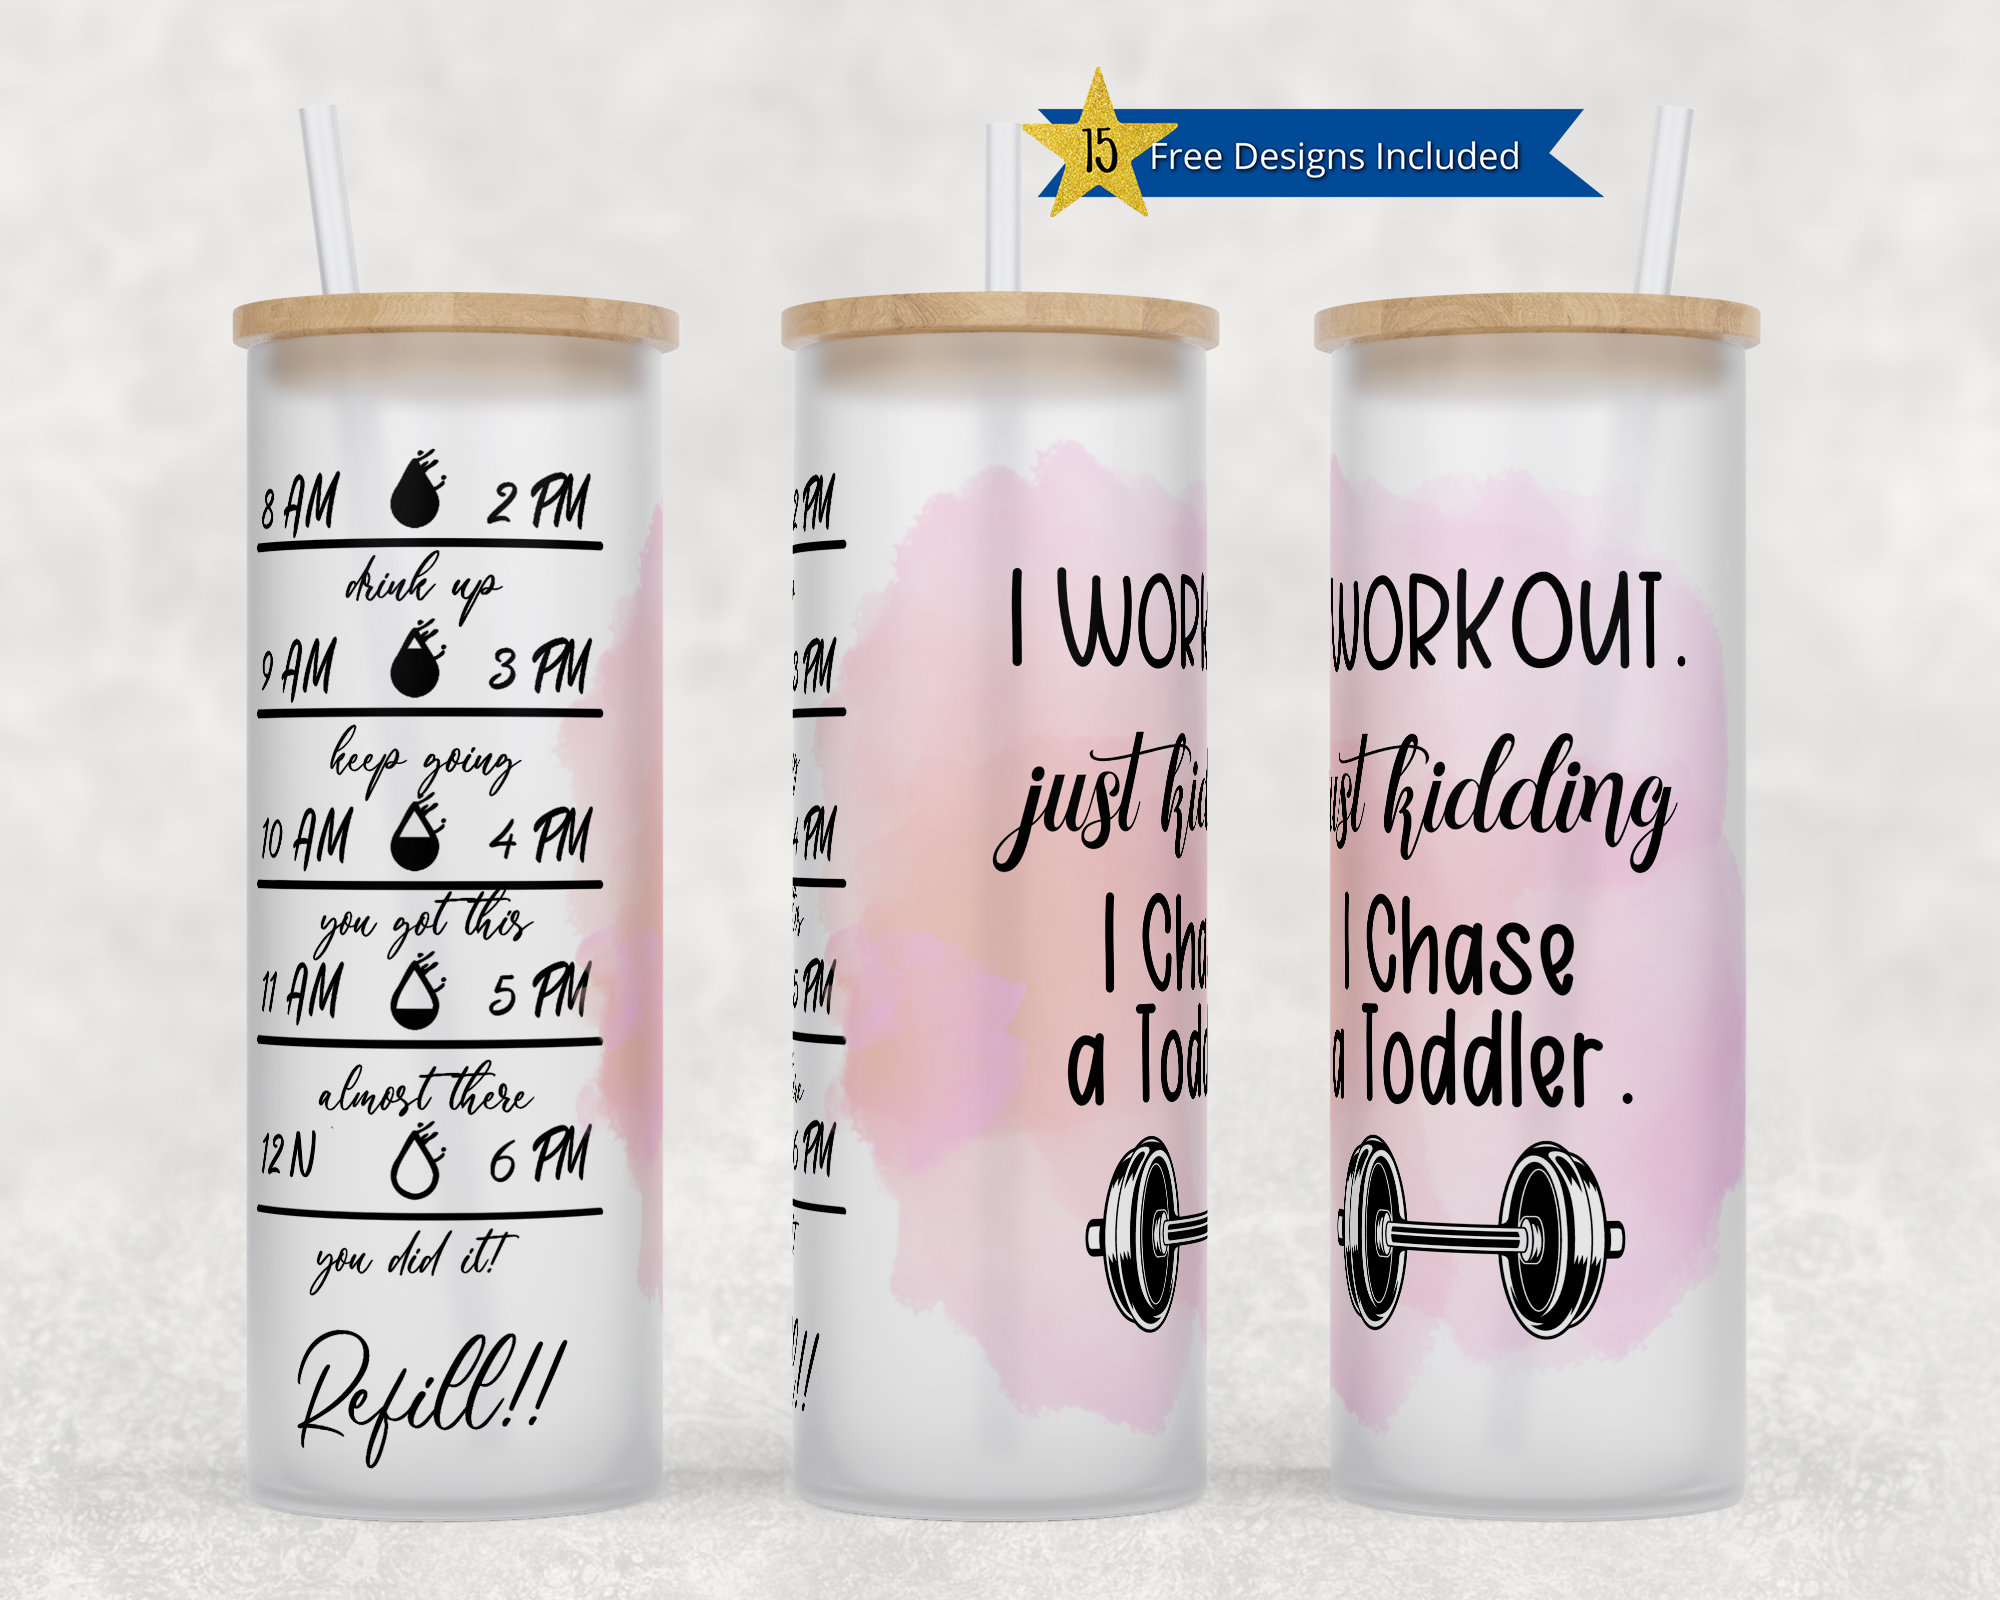 ZAK! Tumblers on Sale for $5.99!